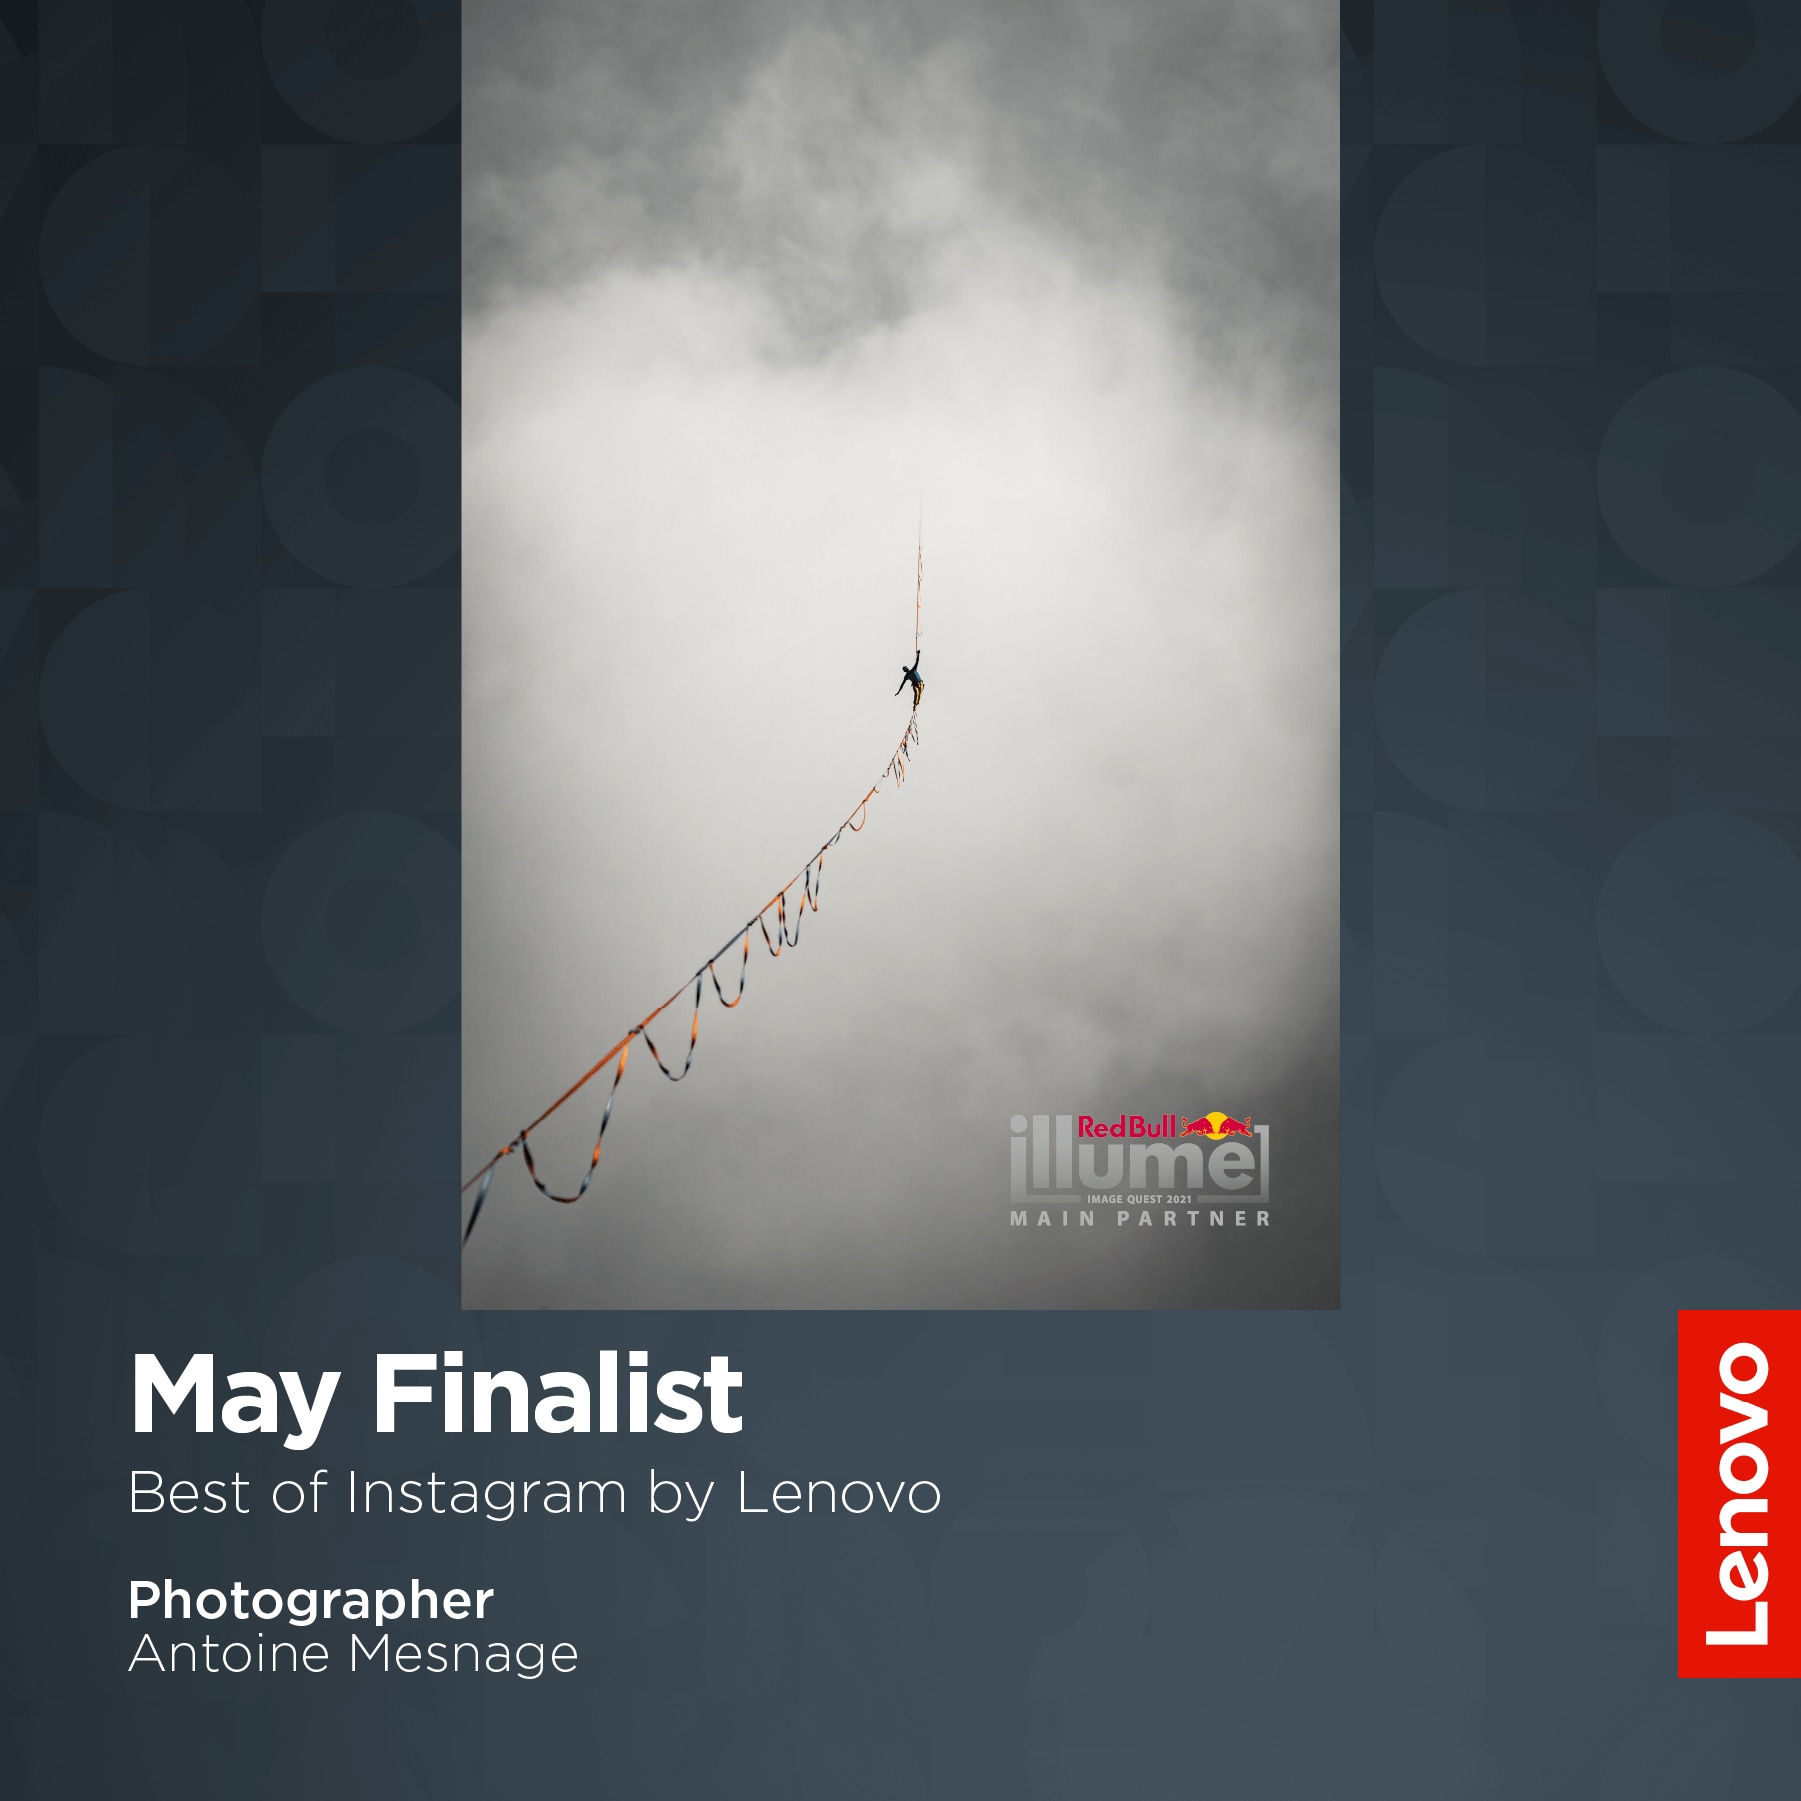 May 2021 winner for the Best of Instagram category (Presented by Lenovo) in the Red Bull Illume Contest